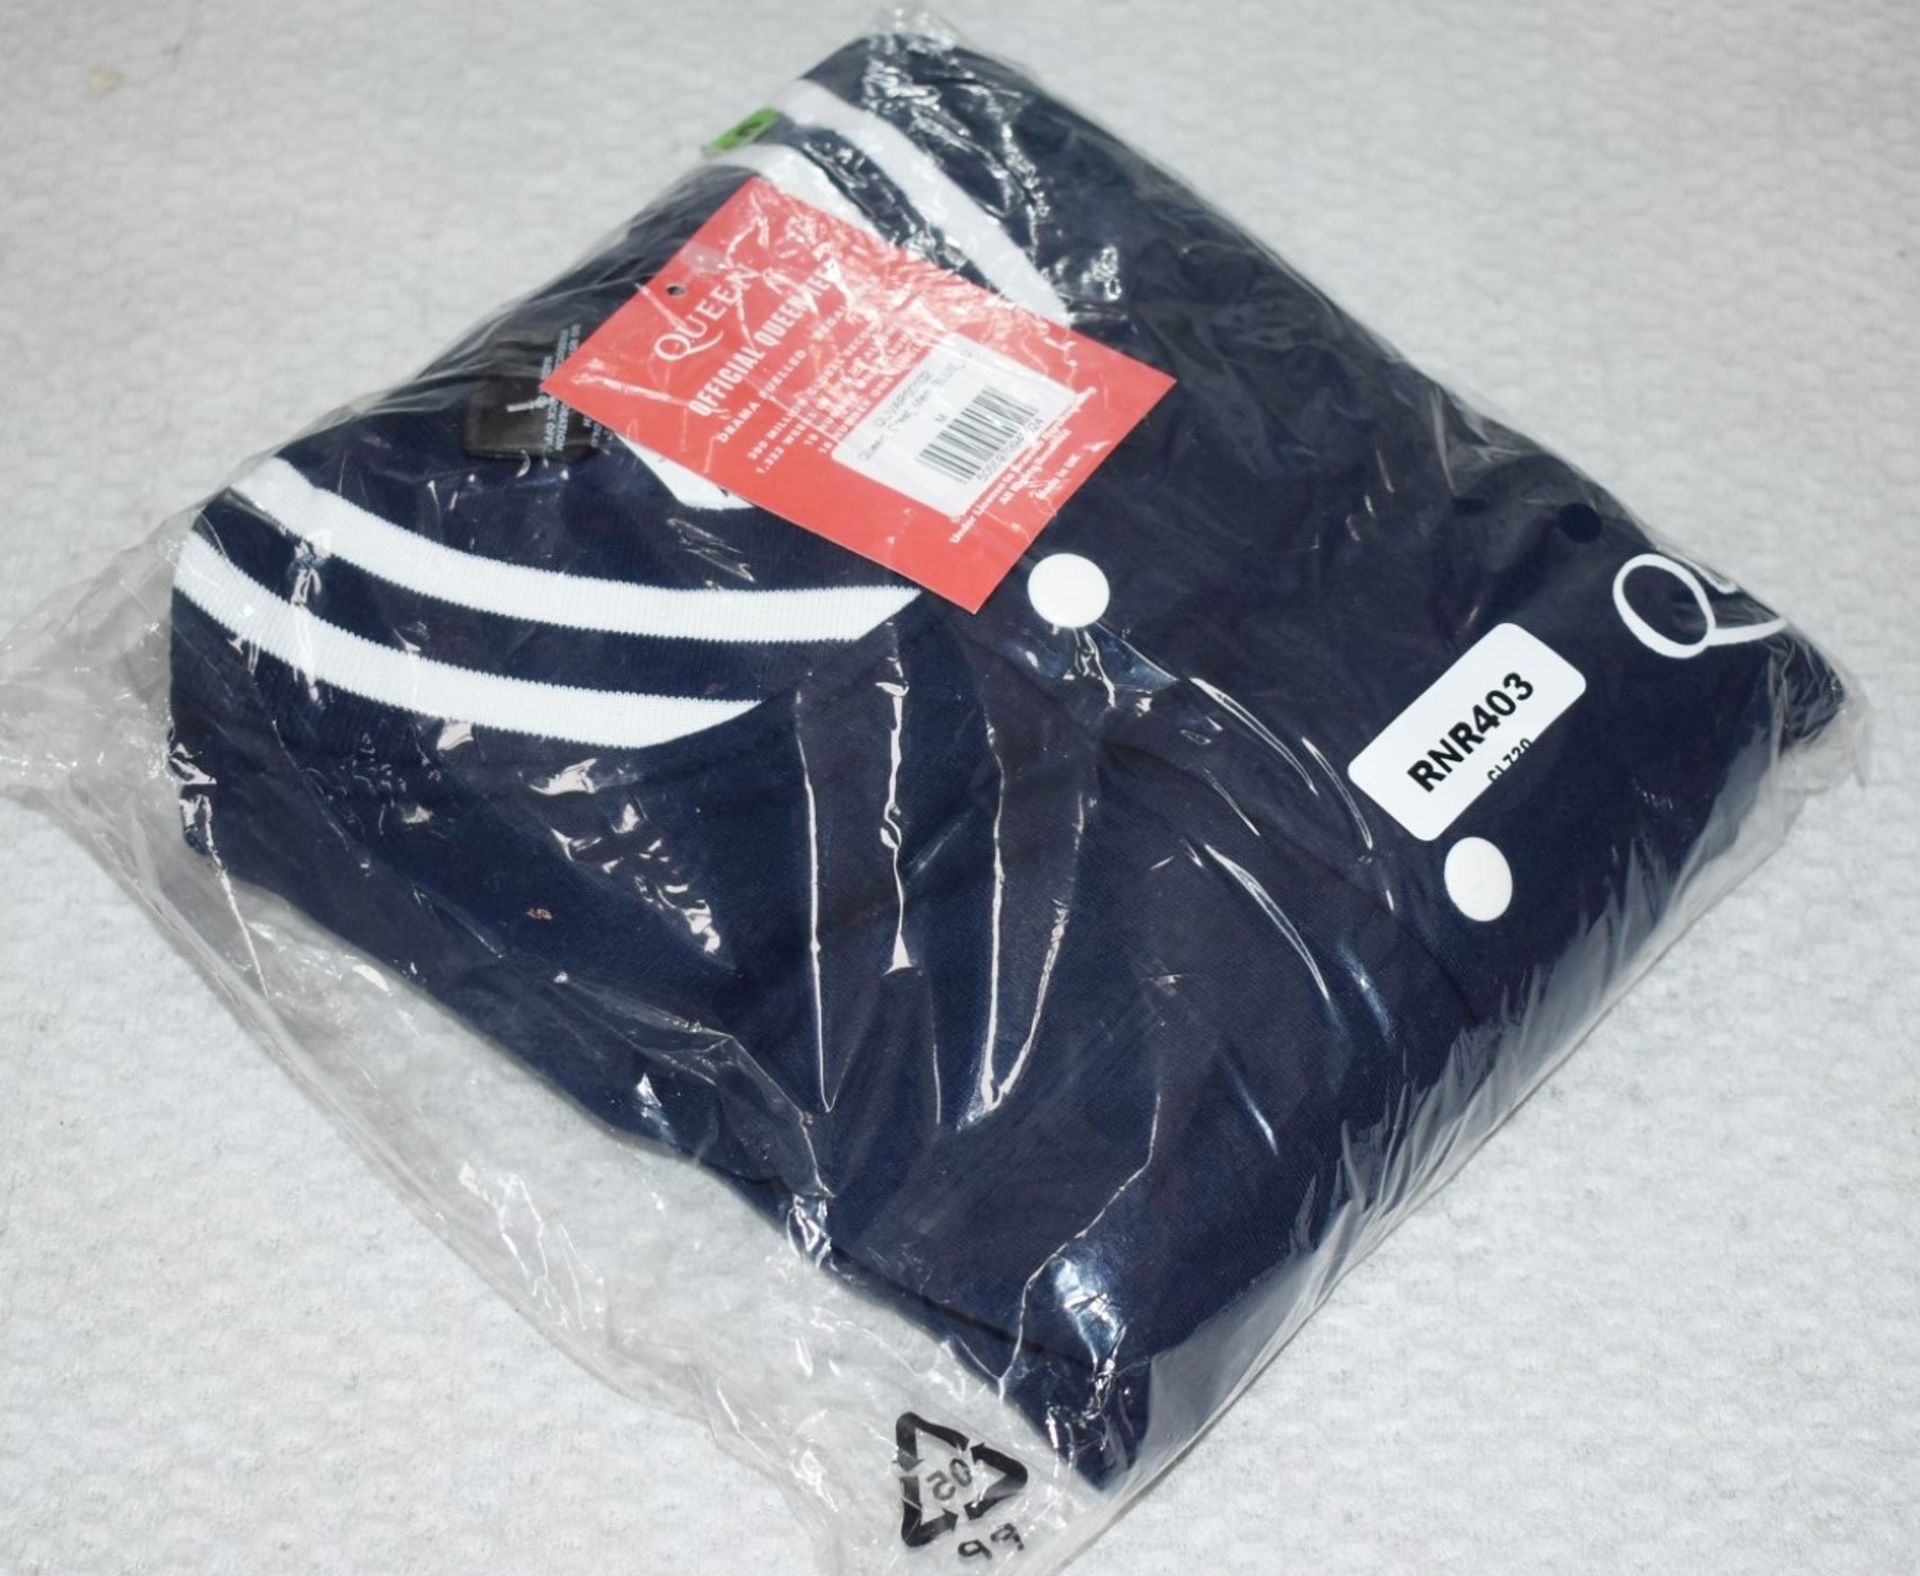 1 x Queen Men's Baseball Jacket in Blue With Crest Design Motif - Size: XXL - RRP £55 - Image 4 of 5